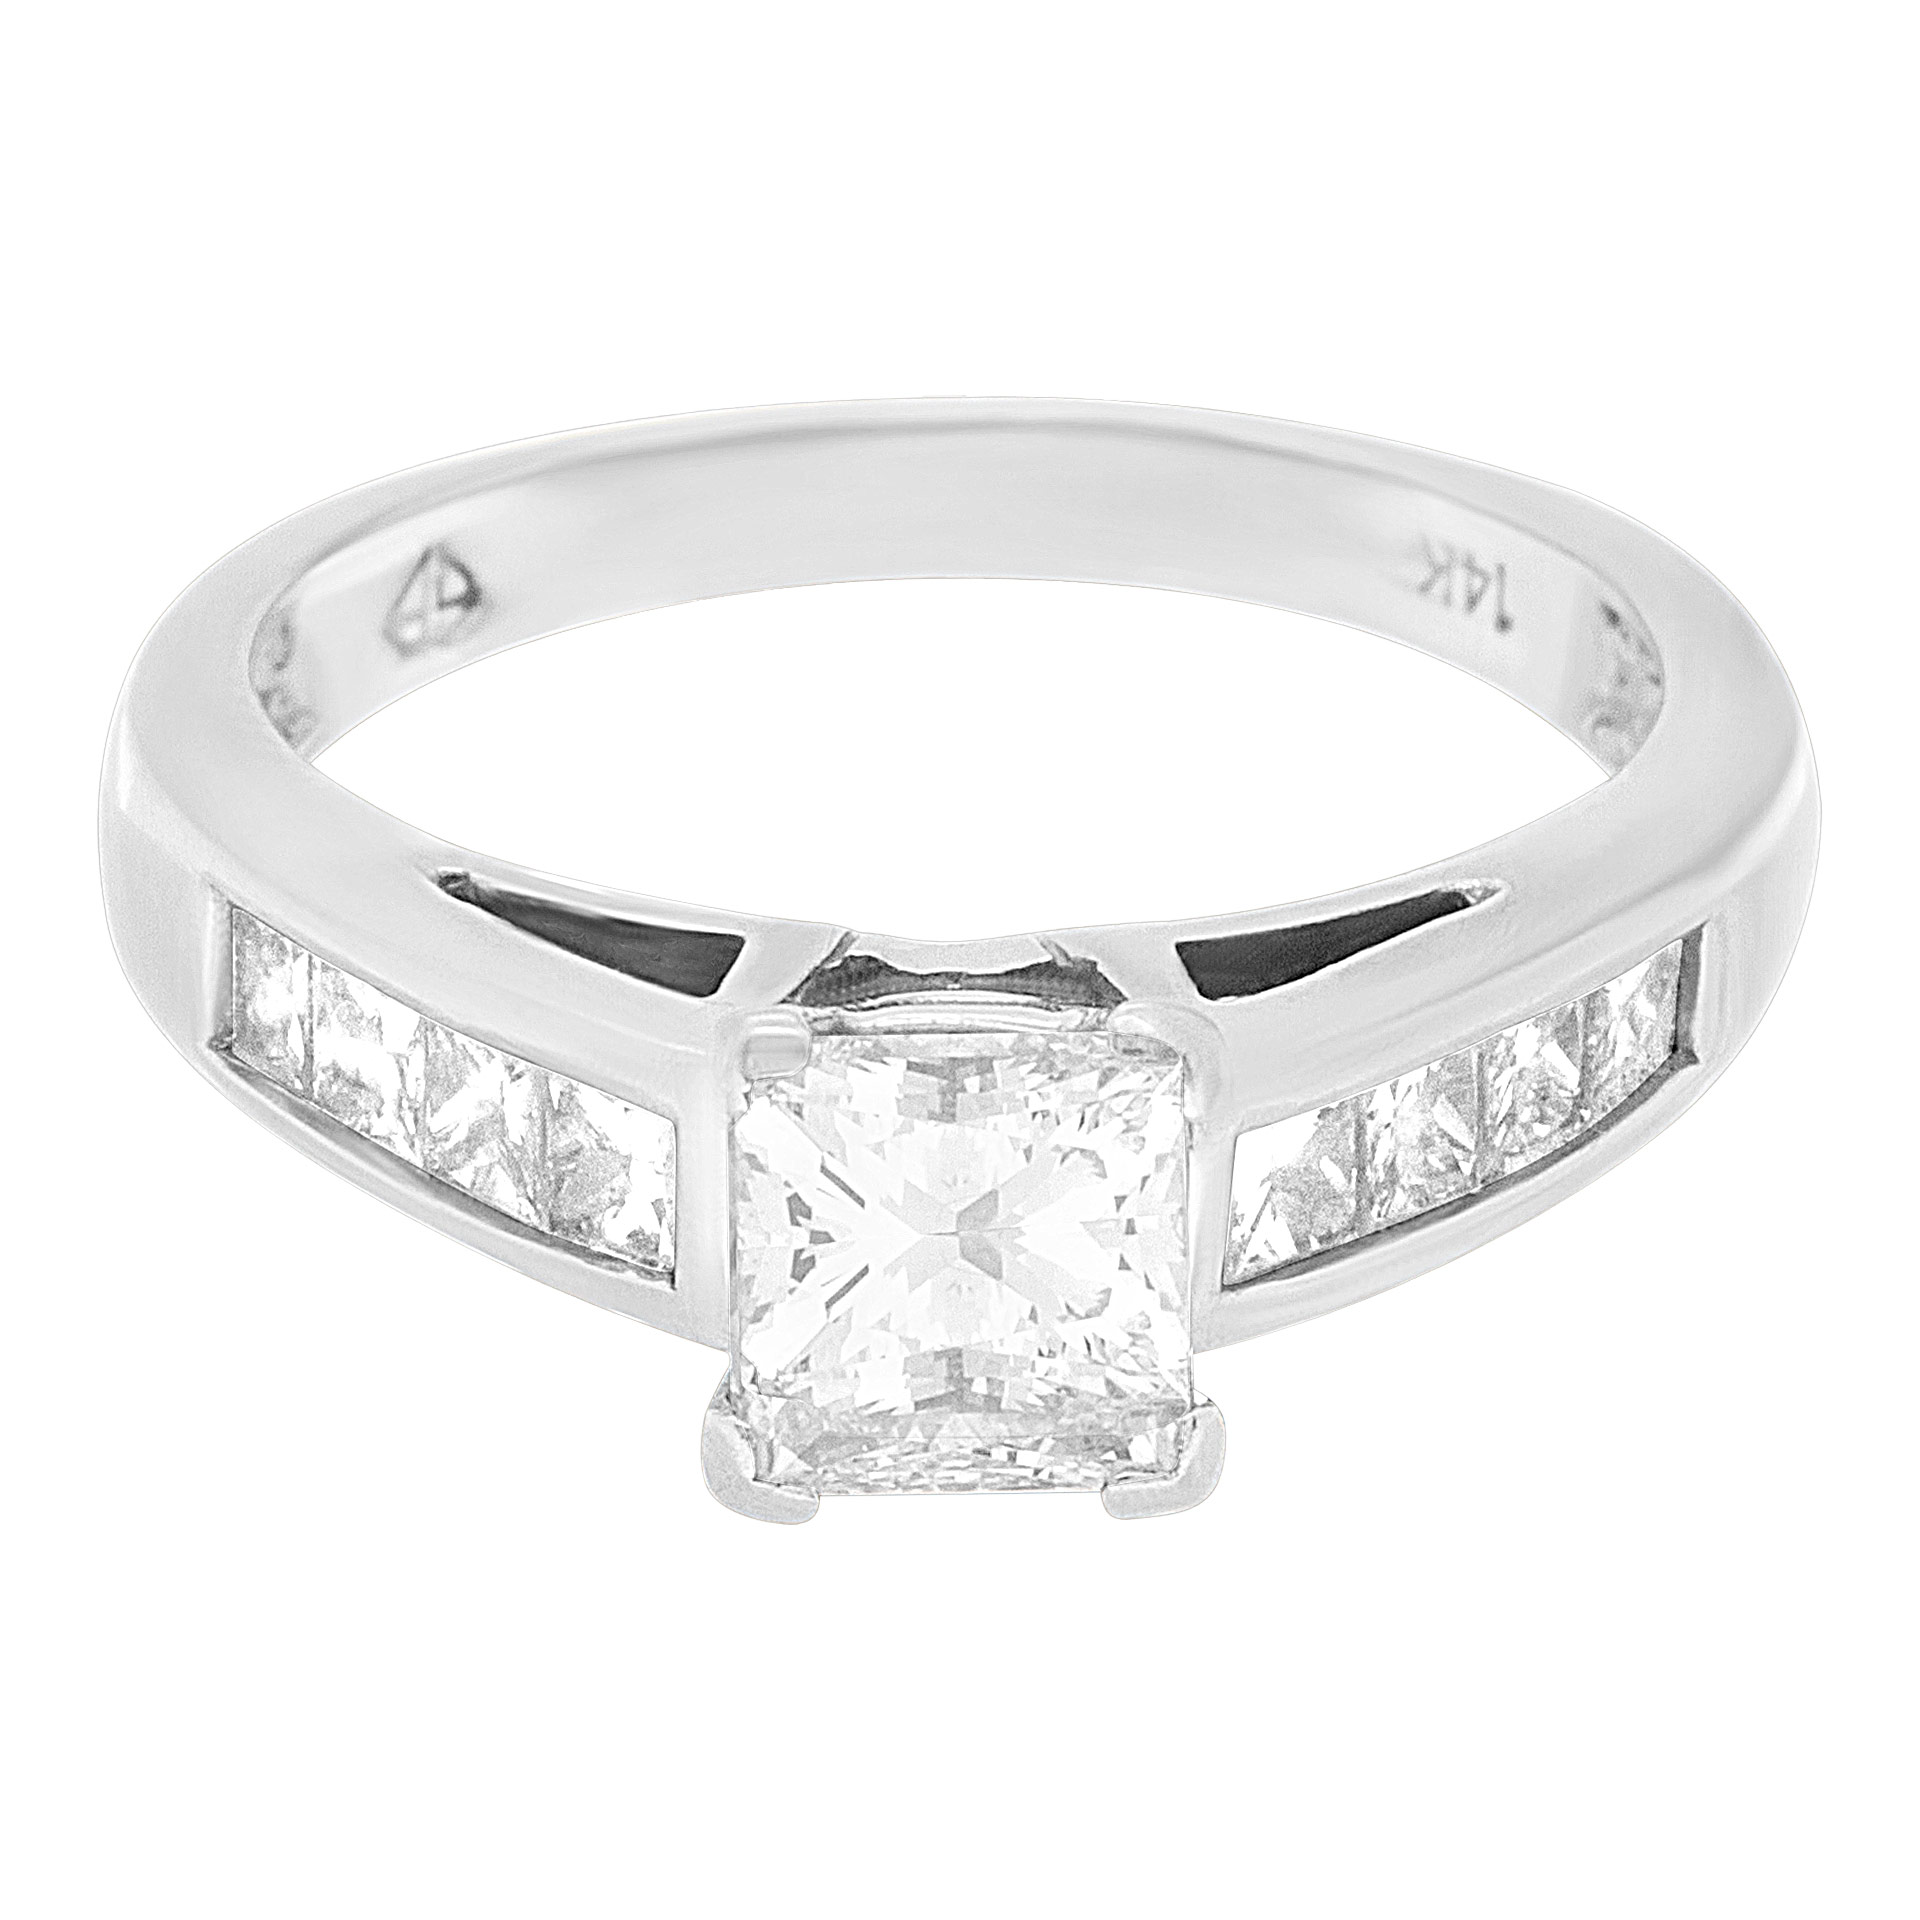 GIA certified rectangular modified brilliant cut diamond 1.01cts (F, SI1) ring